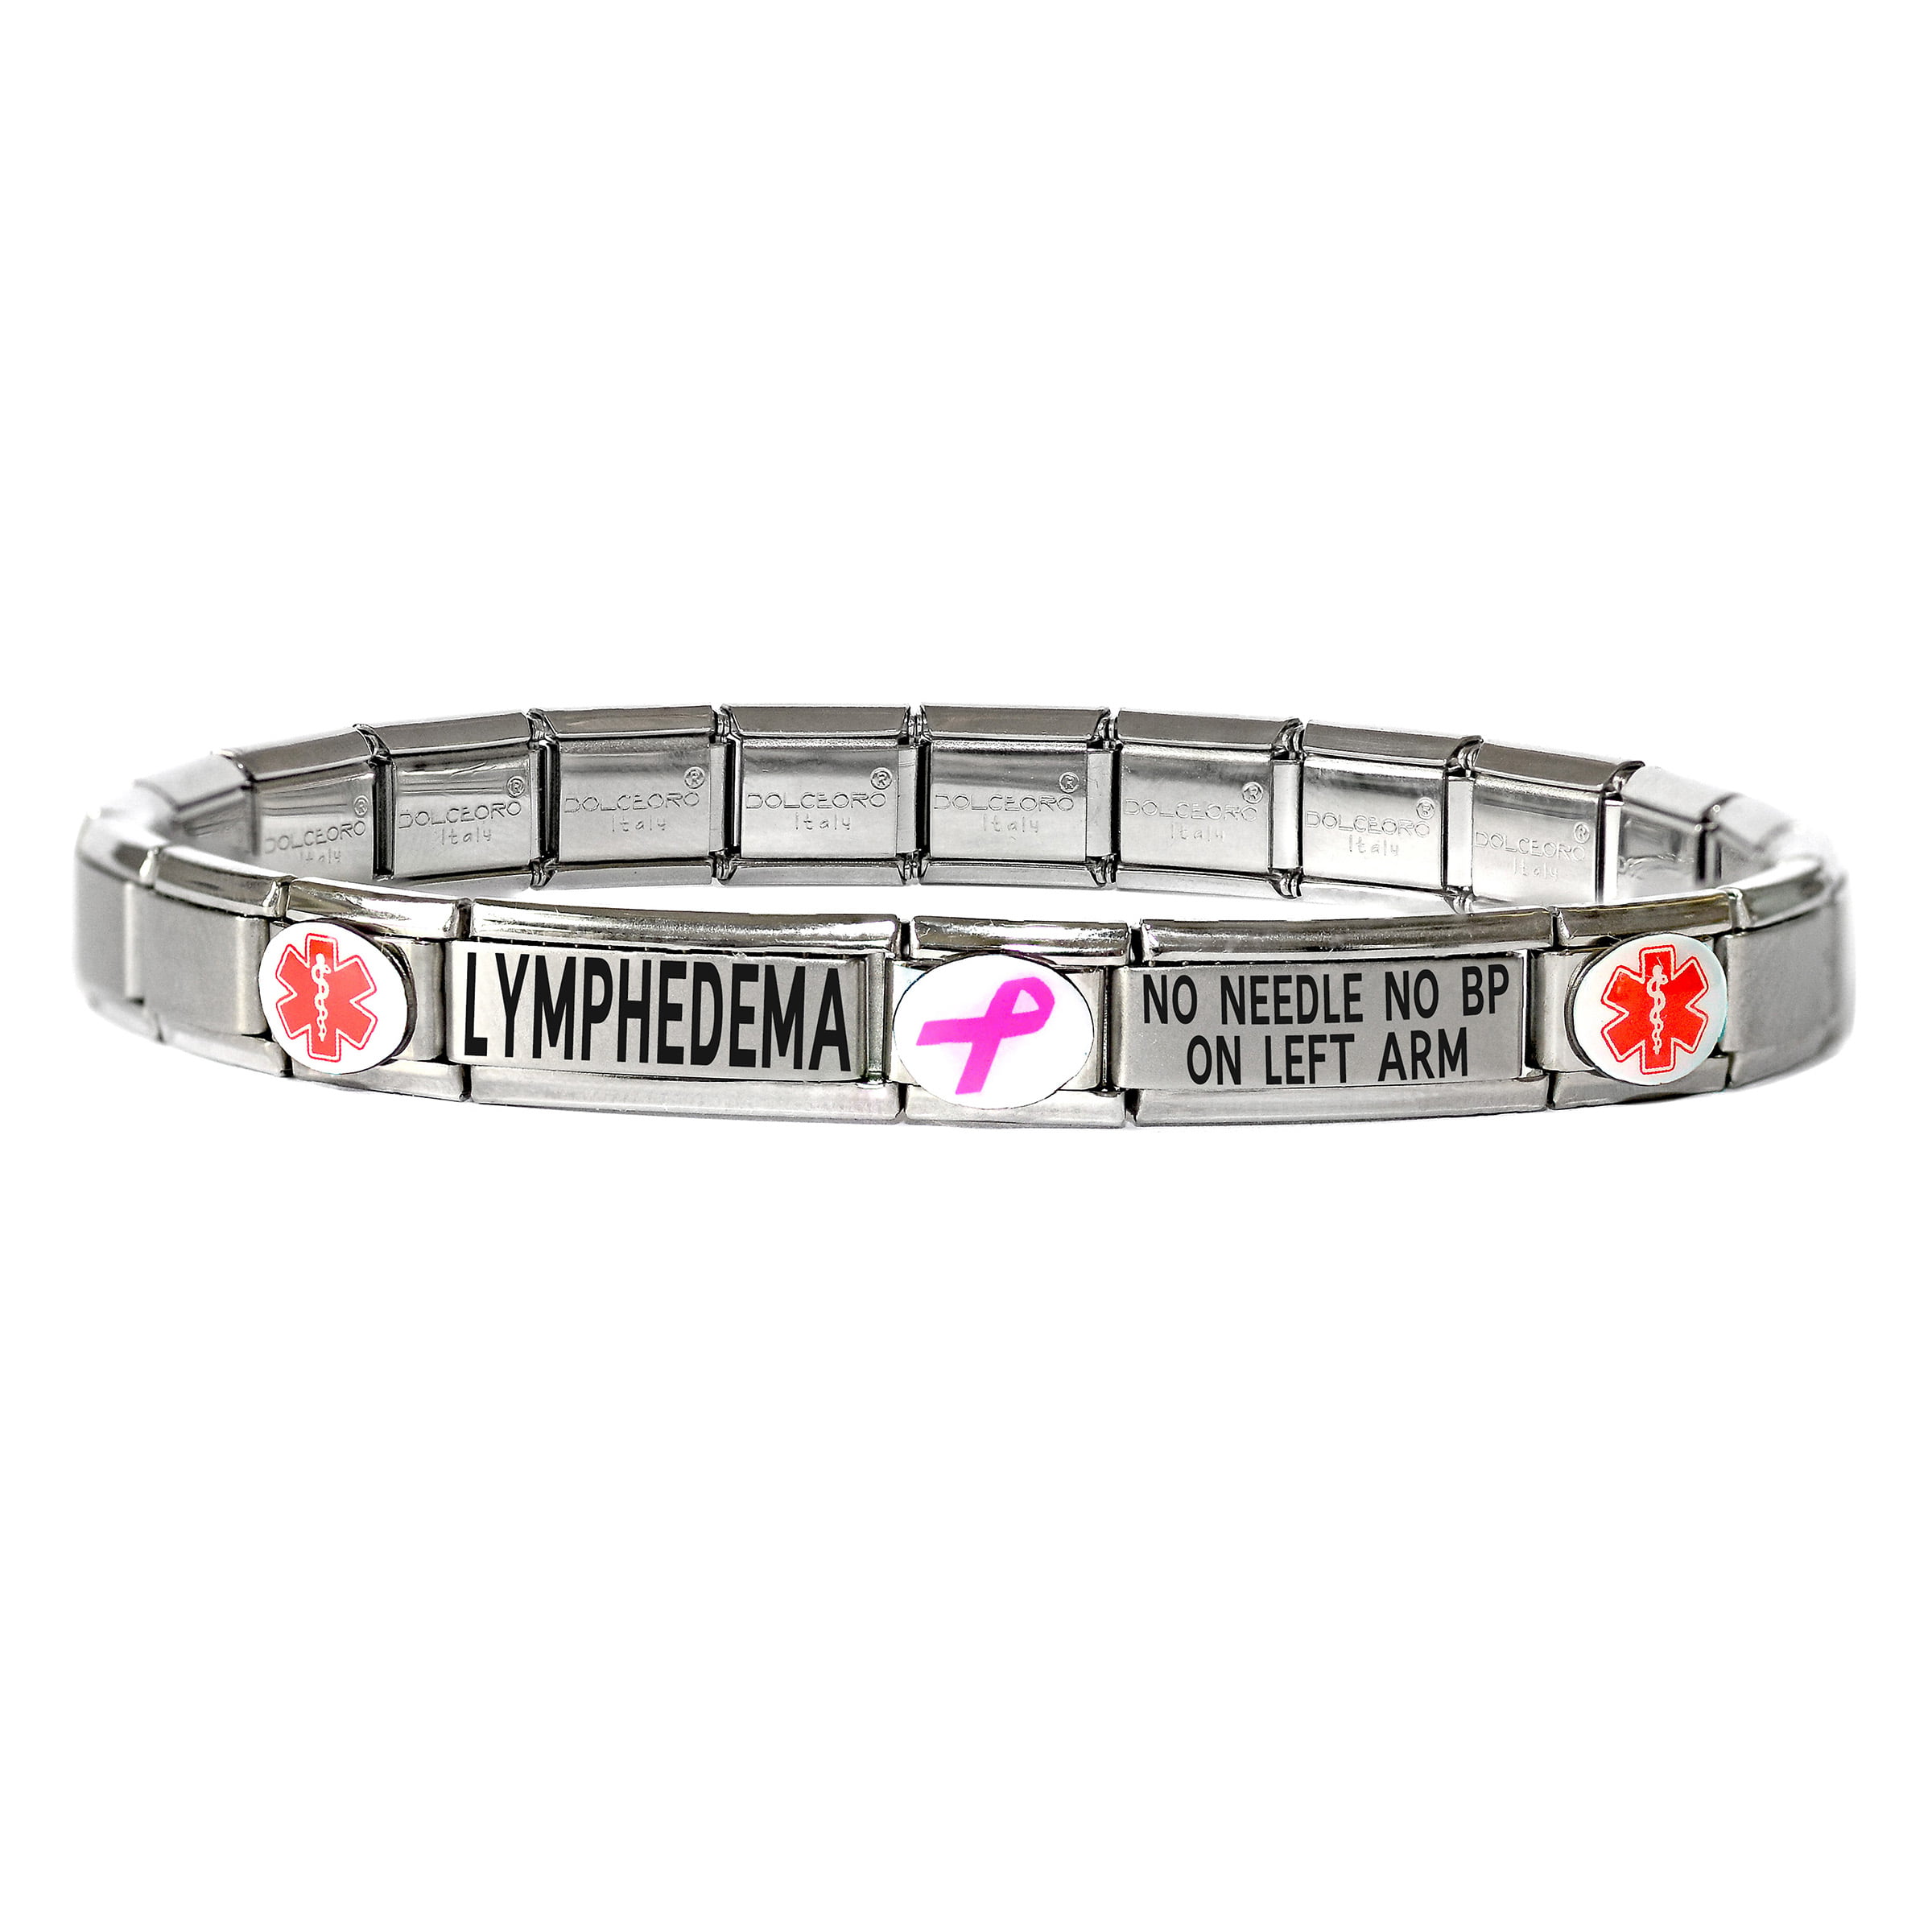 Put Details in Lift up Section, Customized Medical Card+Strips Free Medical Alert Bracelet for Men Womens Ladies ID Bangle Elastic Stainless Steel Personalised